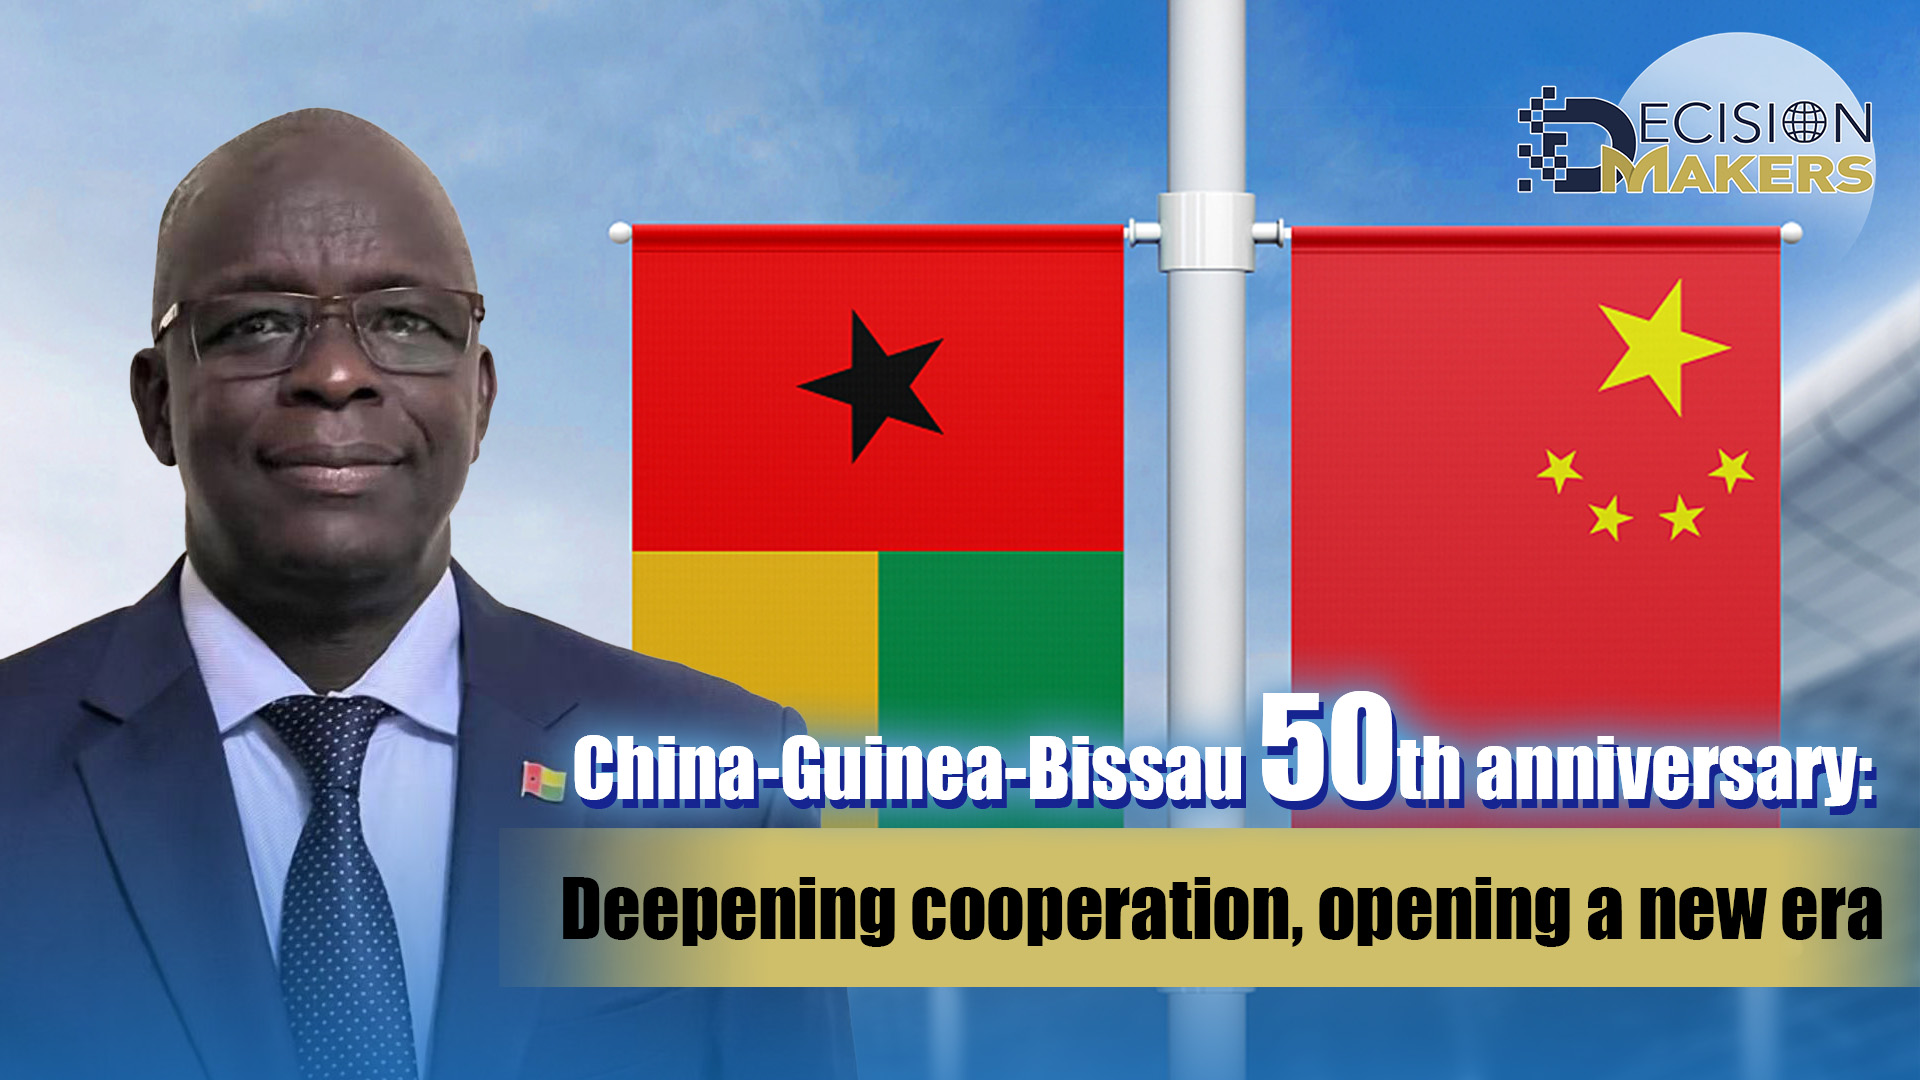 China-Guinea-Bissau 50th anniversary: Deepening cooperation, opening a new era